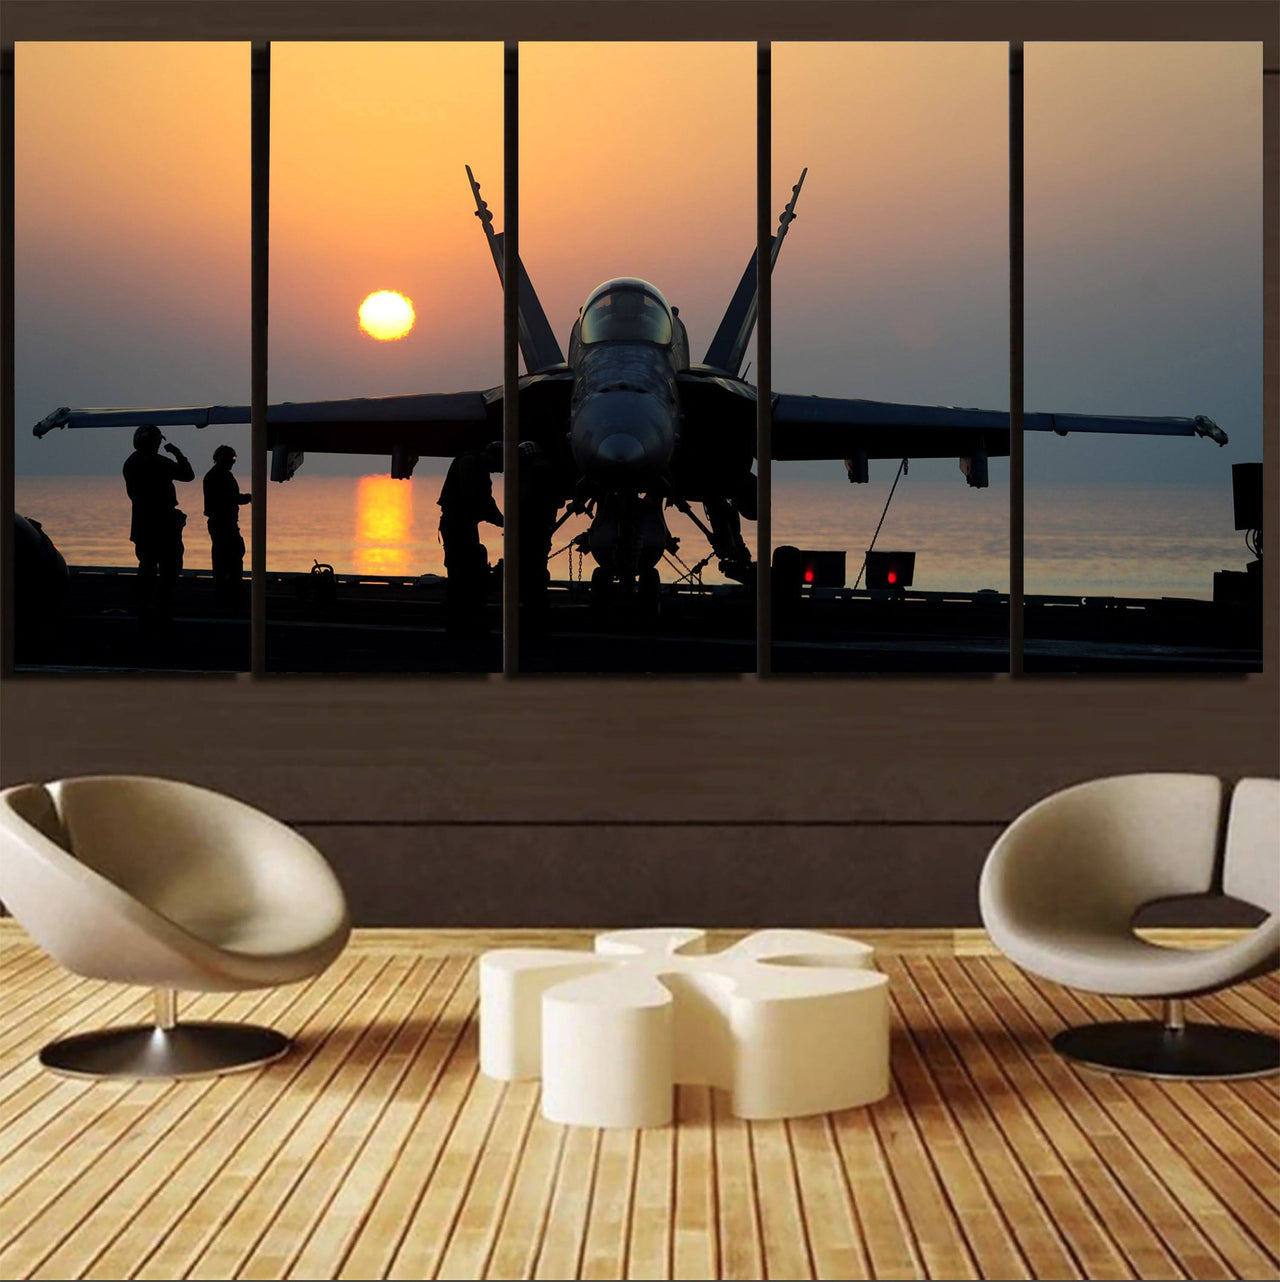 Military Jet During Sunset Printed Canvas Prints (5 Pieces) Aviation Shop 